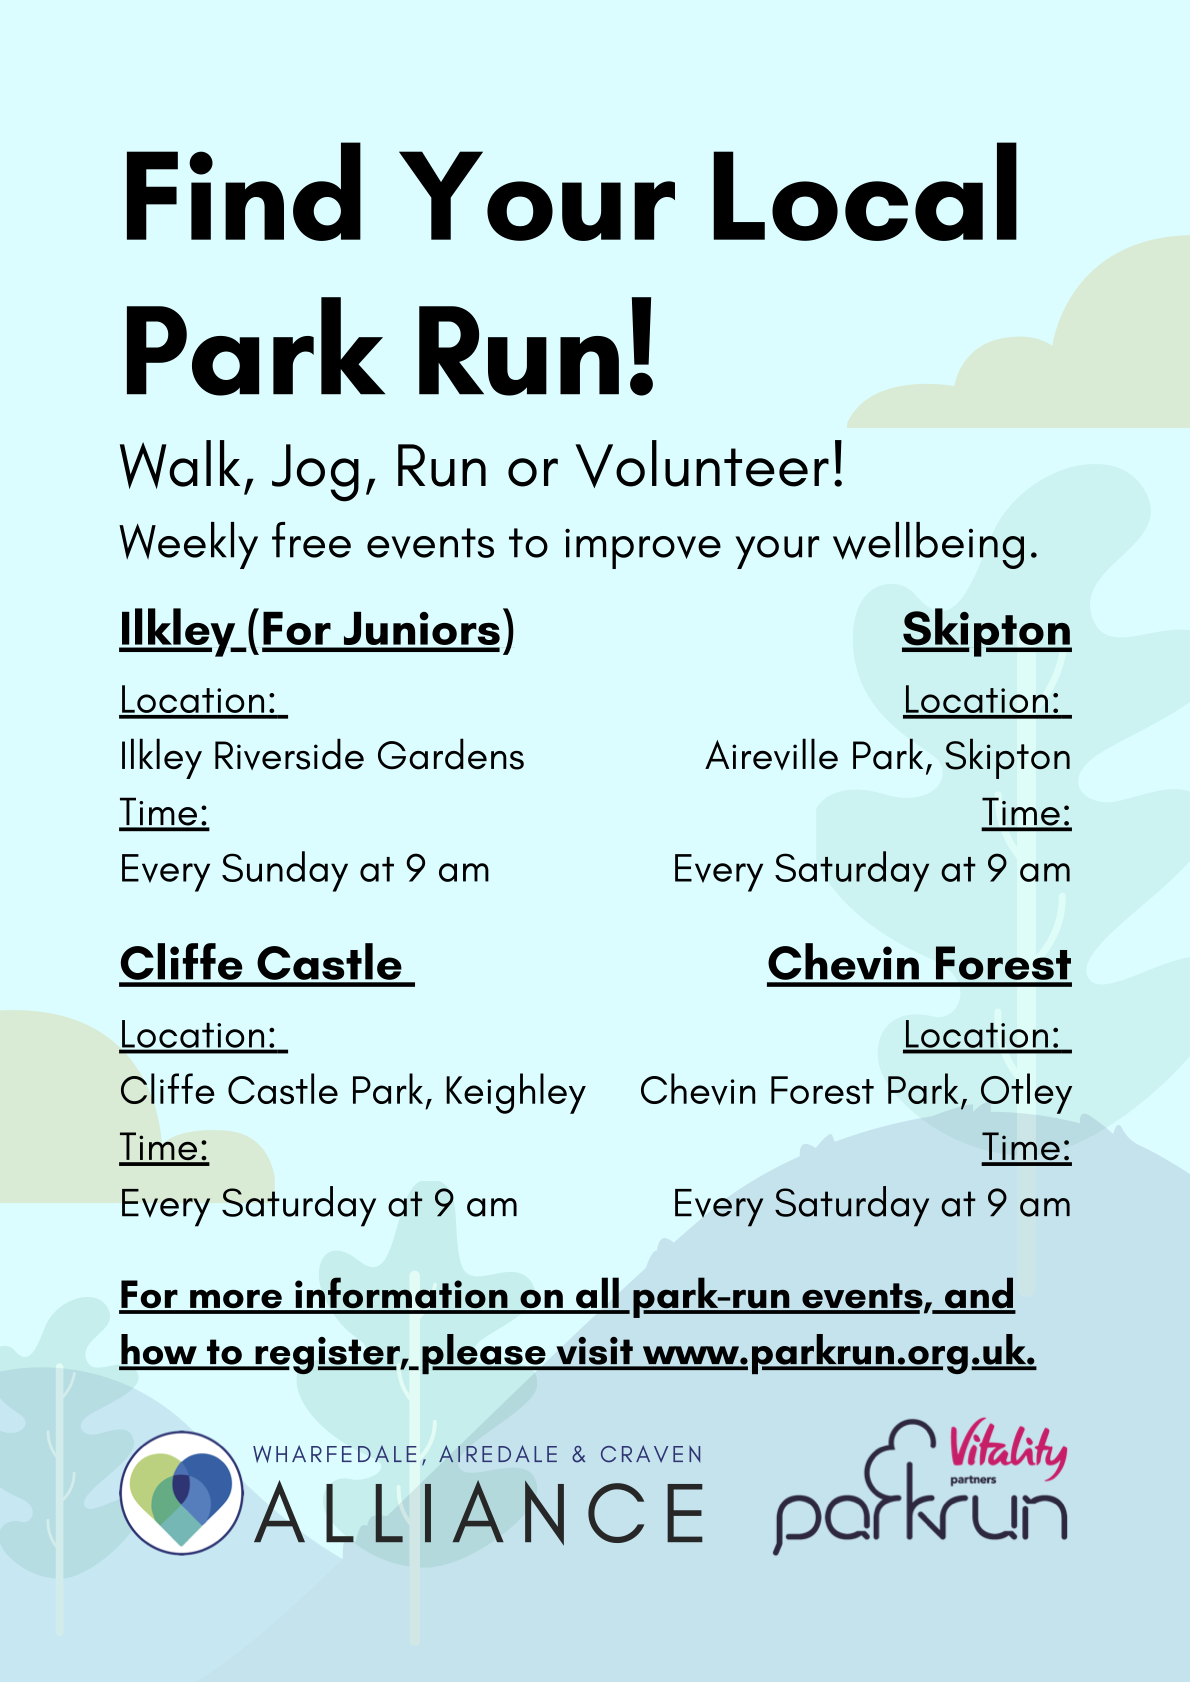 Find Your Local Park Run